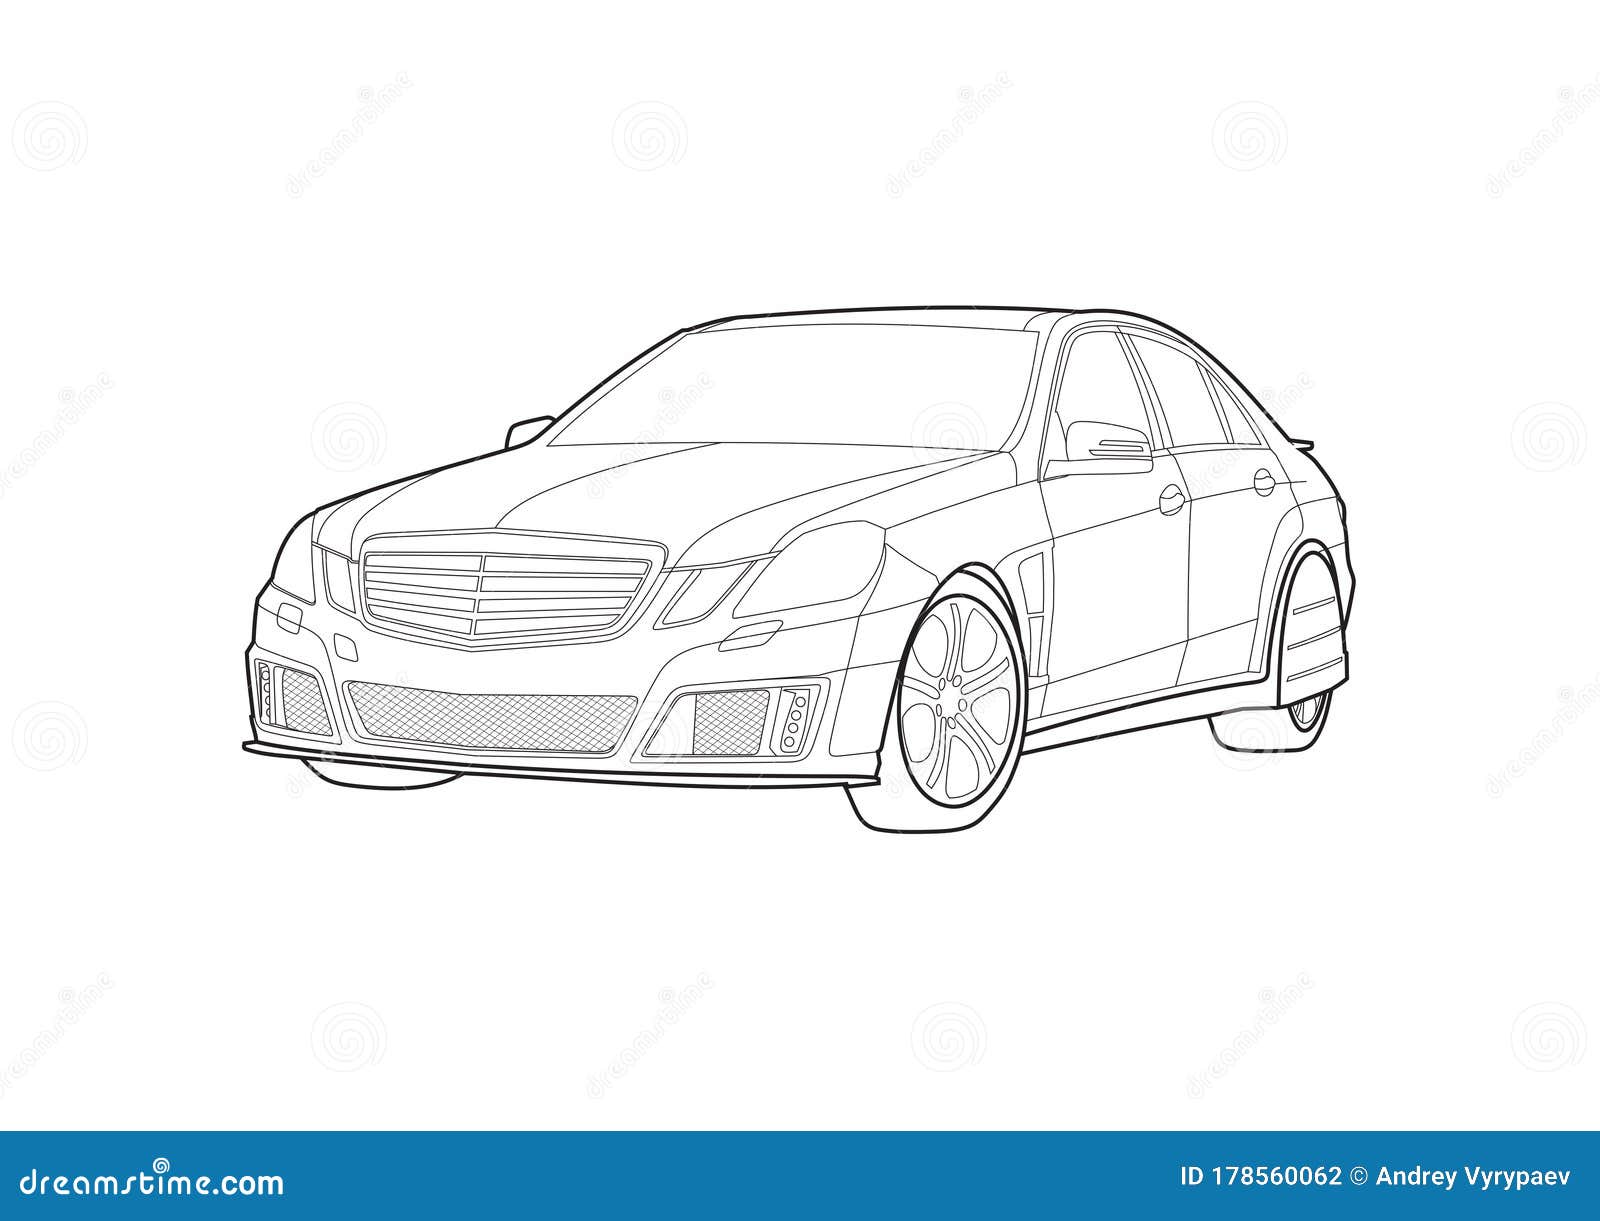 Premium AI Image | A drawing of a mercedes benz car in a city